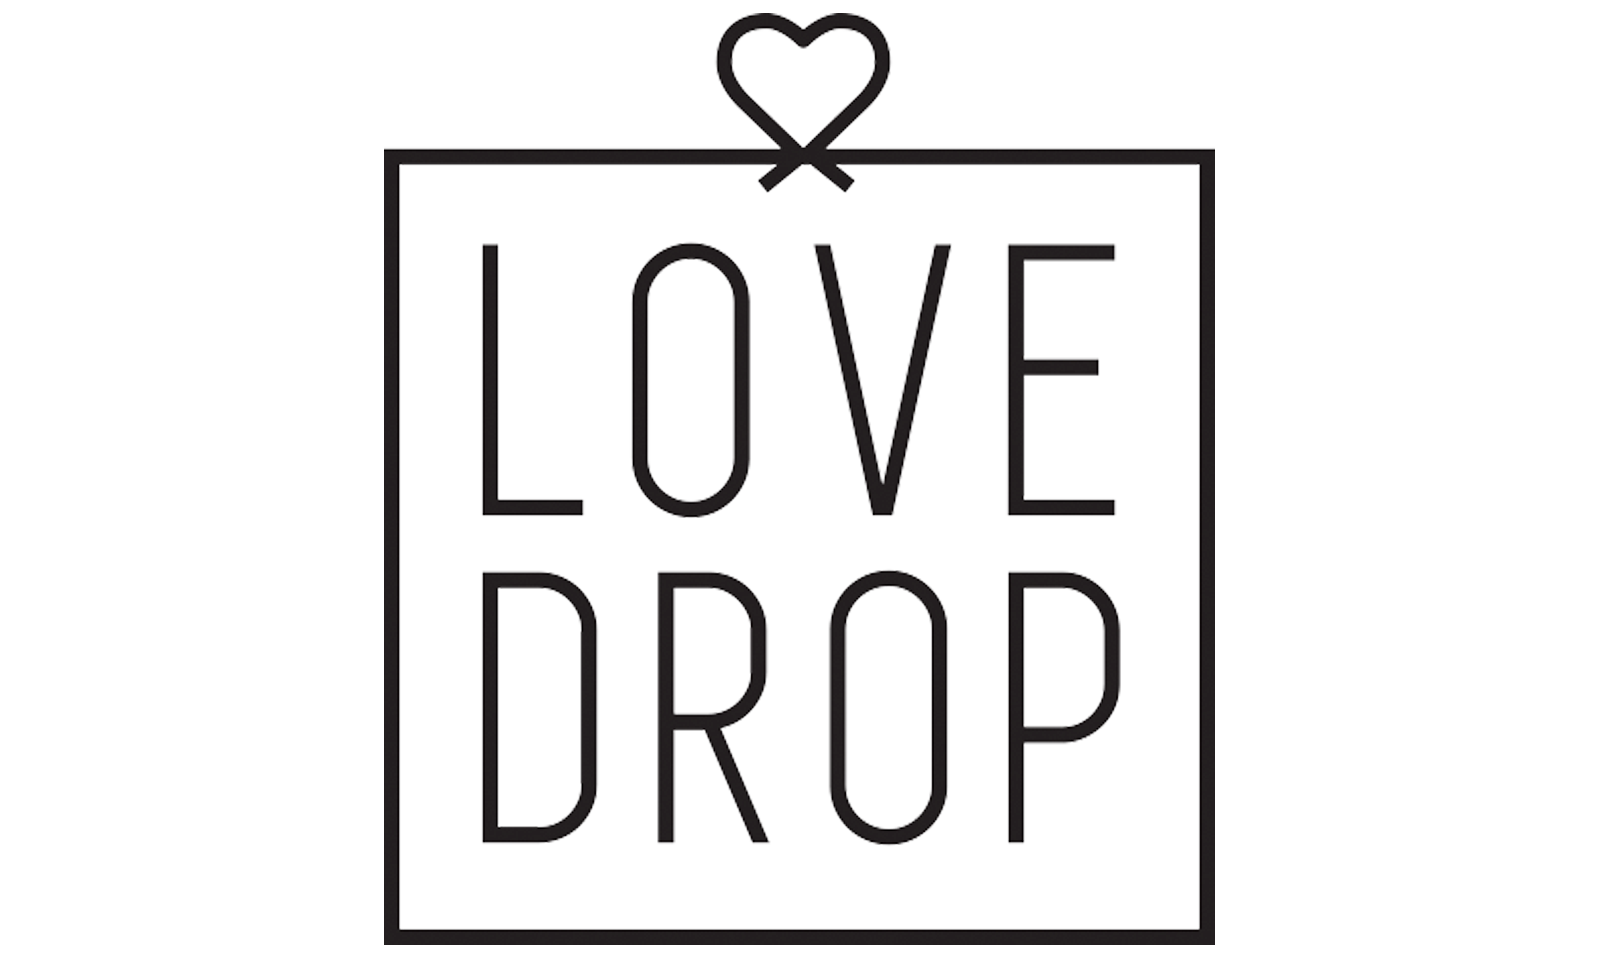 LoveDrop Bows Solo Sex Care, Date Night Couples Subscription Box